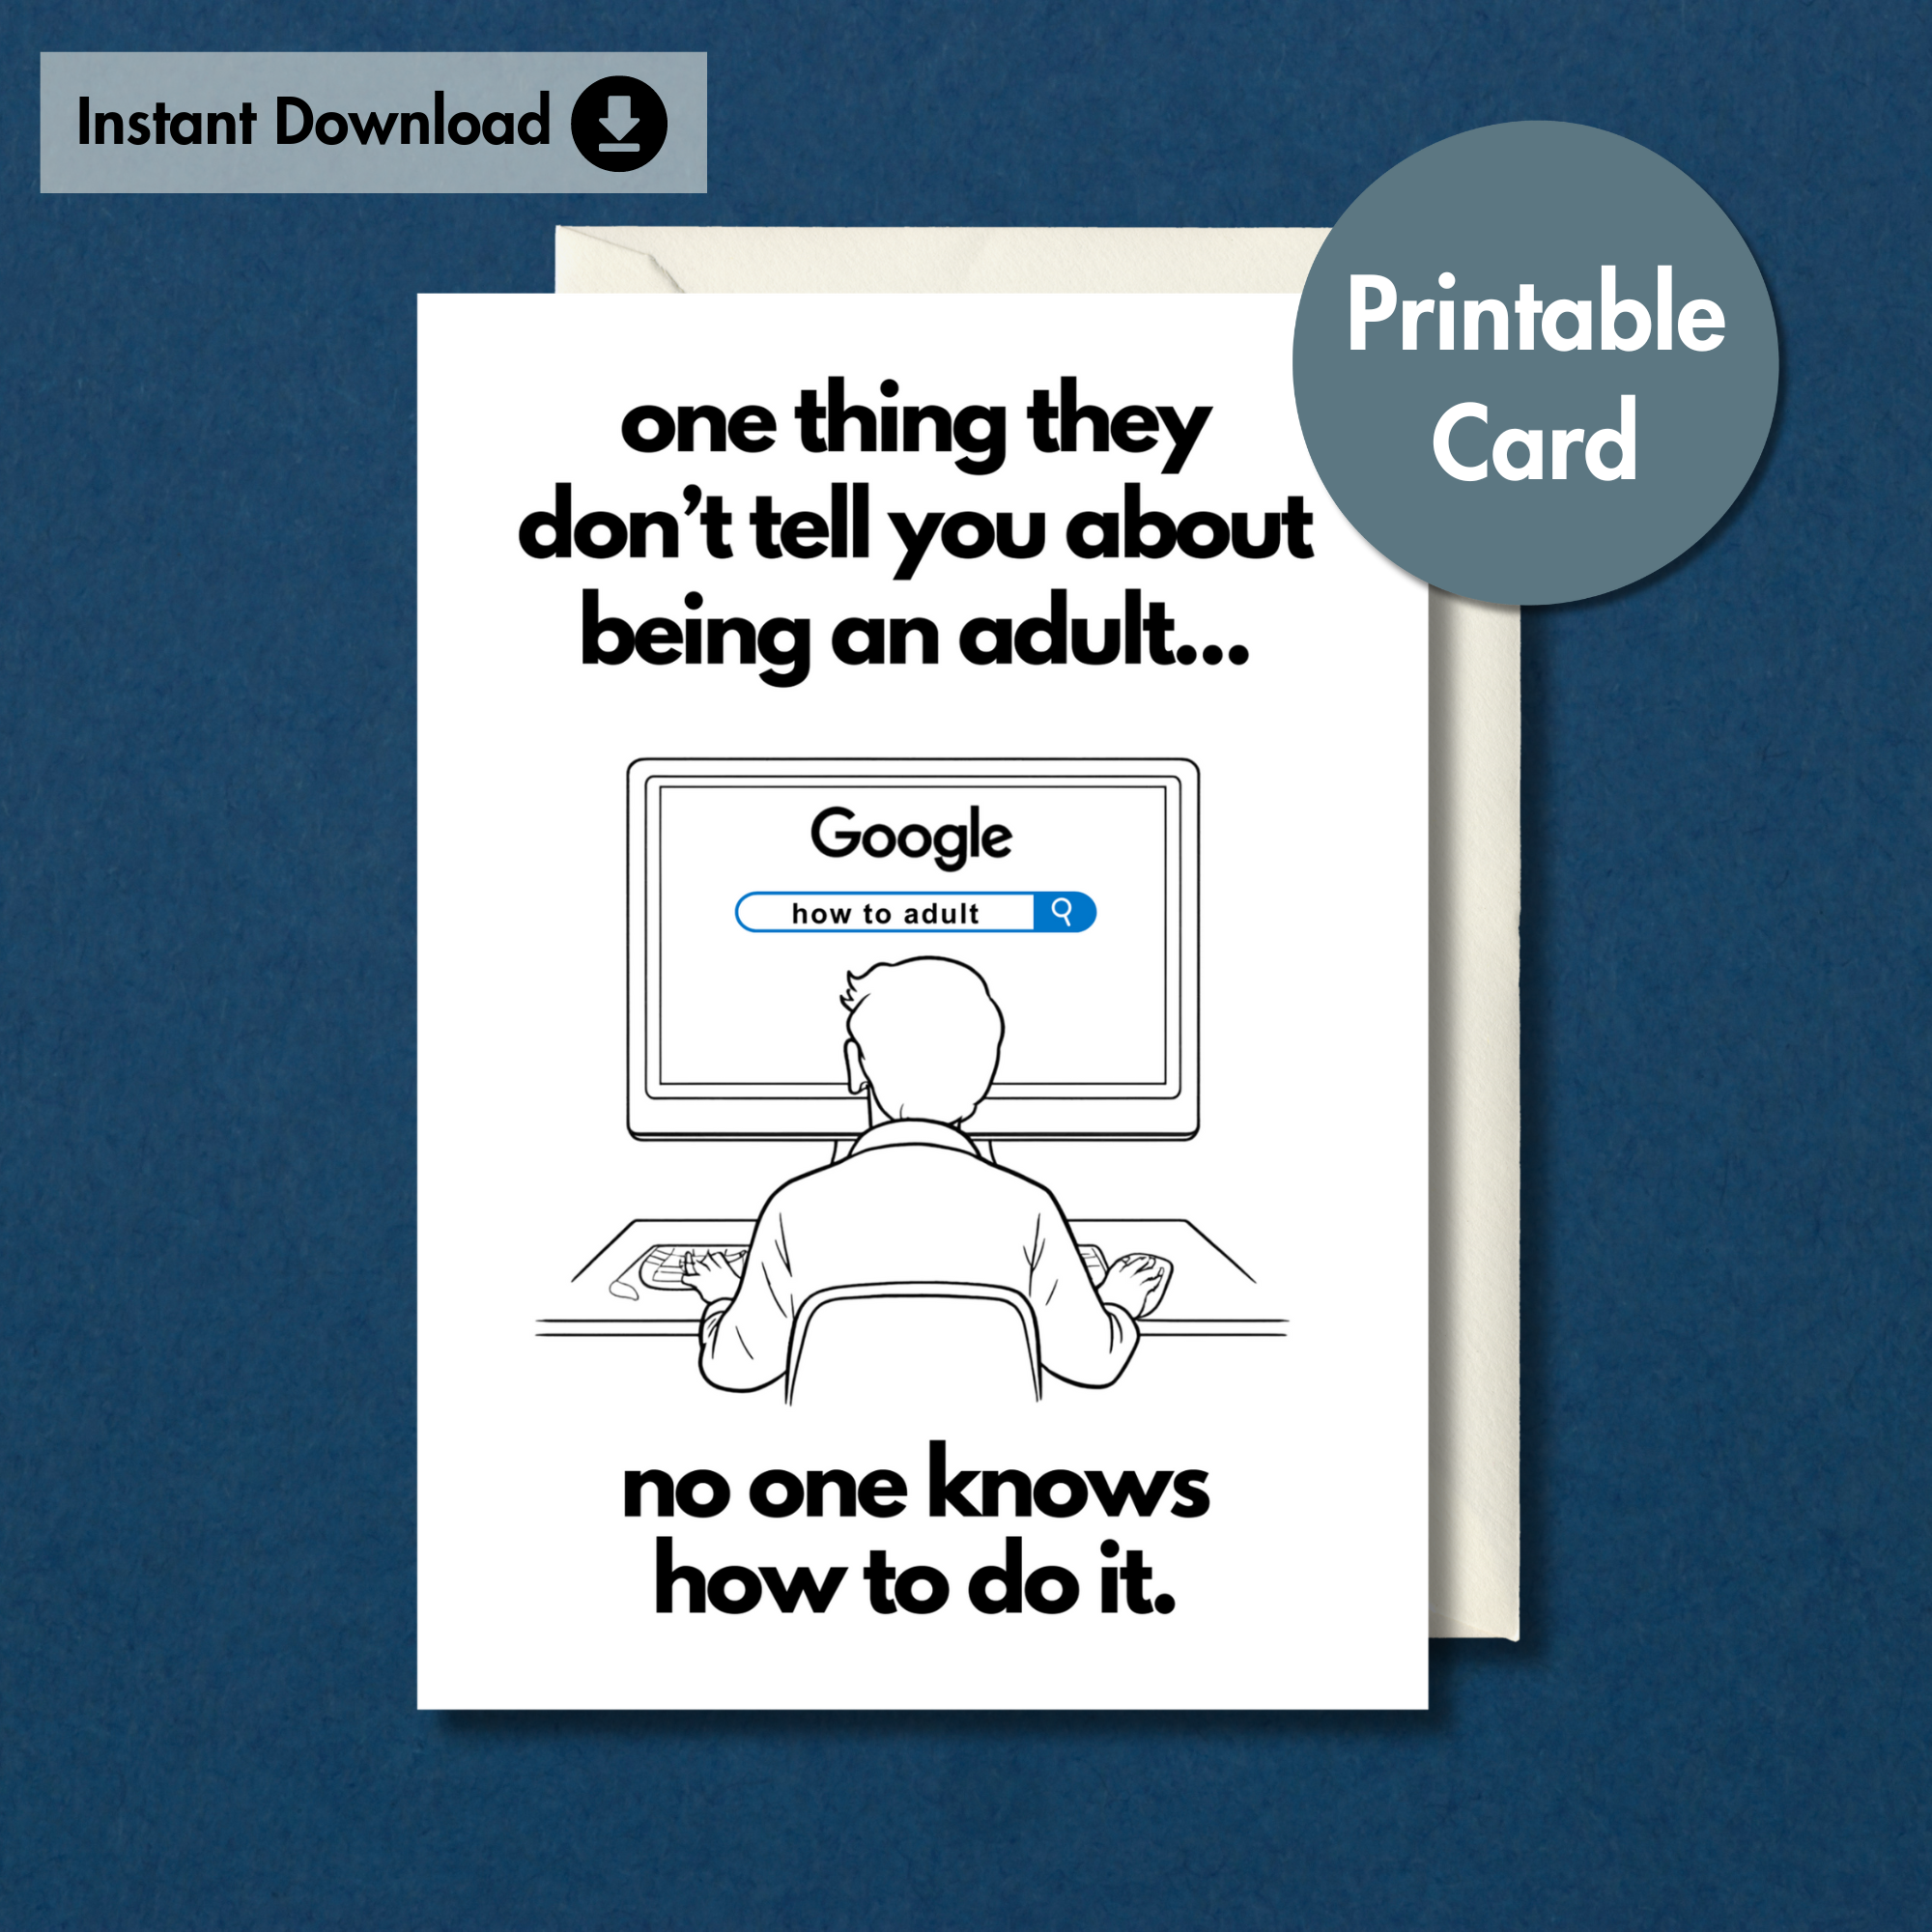 18th Birthday Card Printable | How to Adult Funny Card | Instant Download